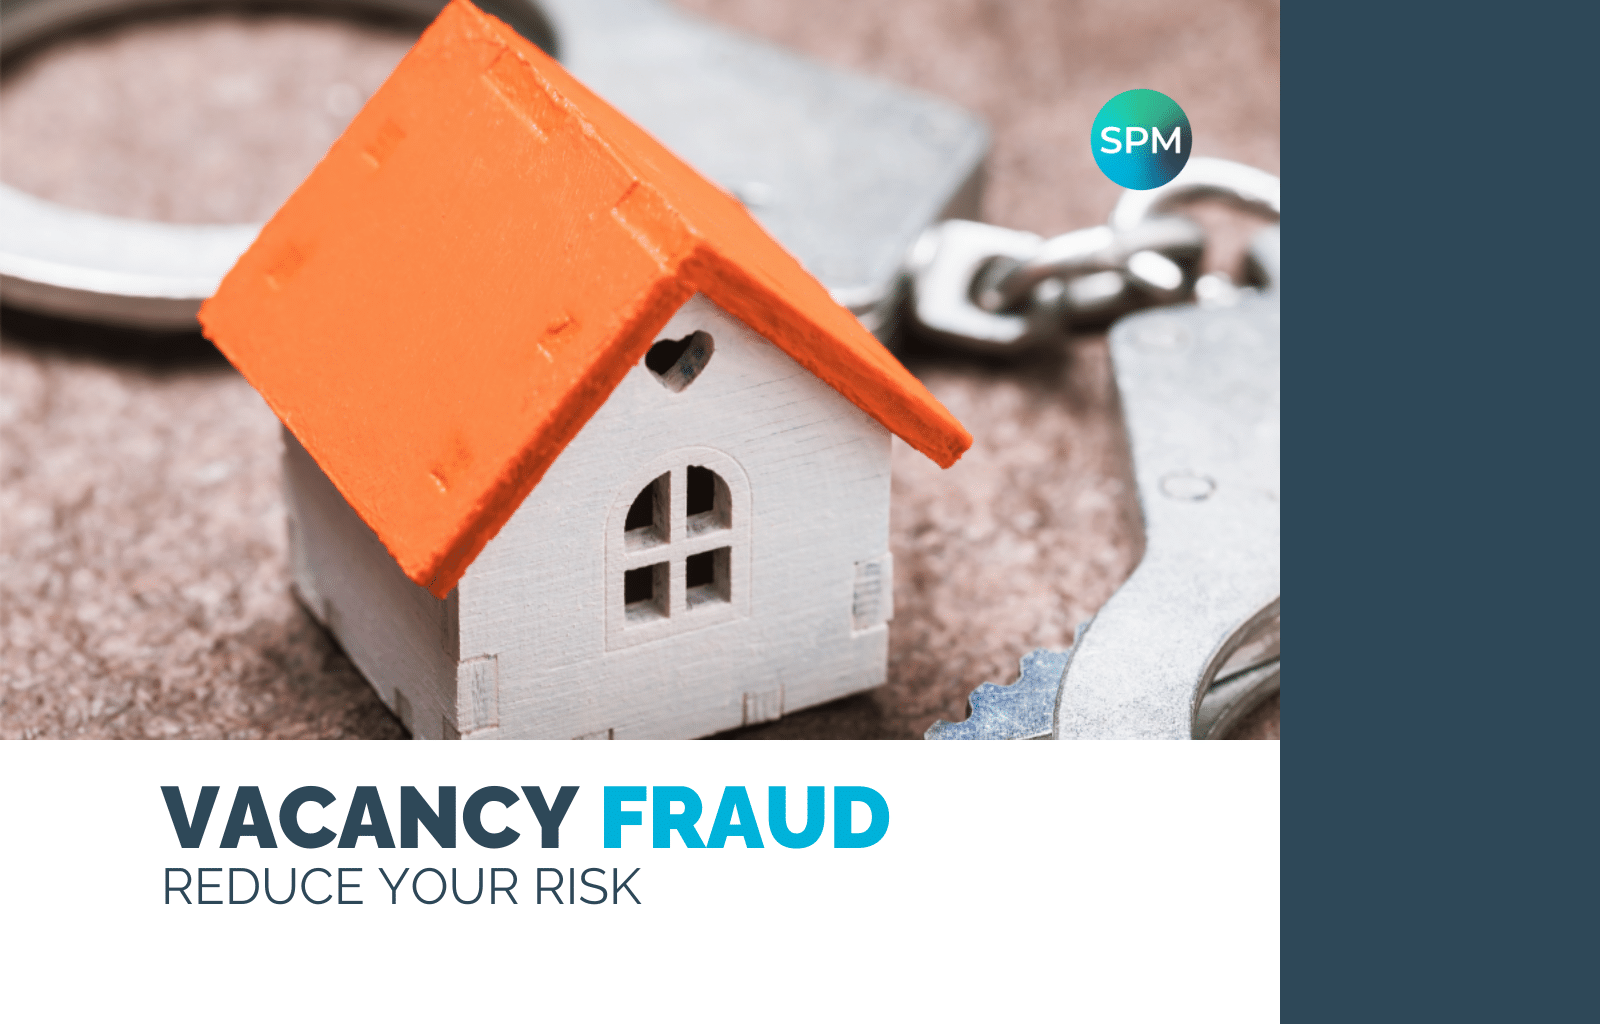 Vacancy Fraud - Reduce Your Risk